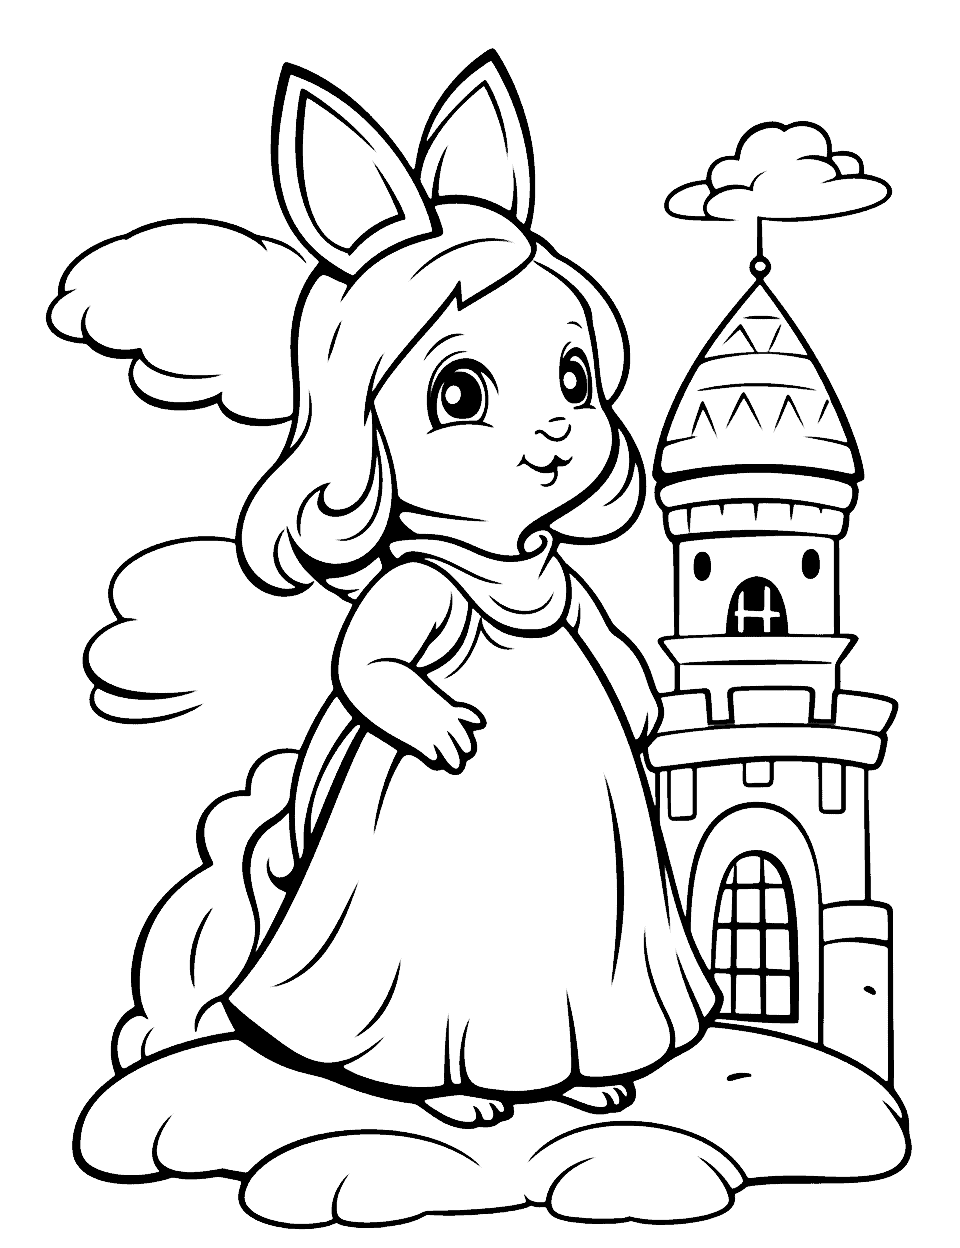 Bunny Princess and a Tower Coloring Page - Drawing inspiration from fairytales, a  bunny princess in front of a tower, awaiting her next adventure.